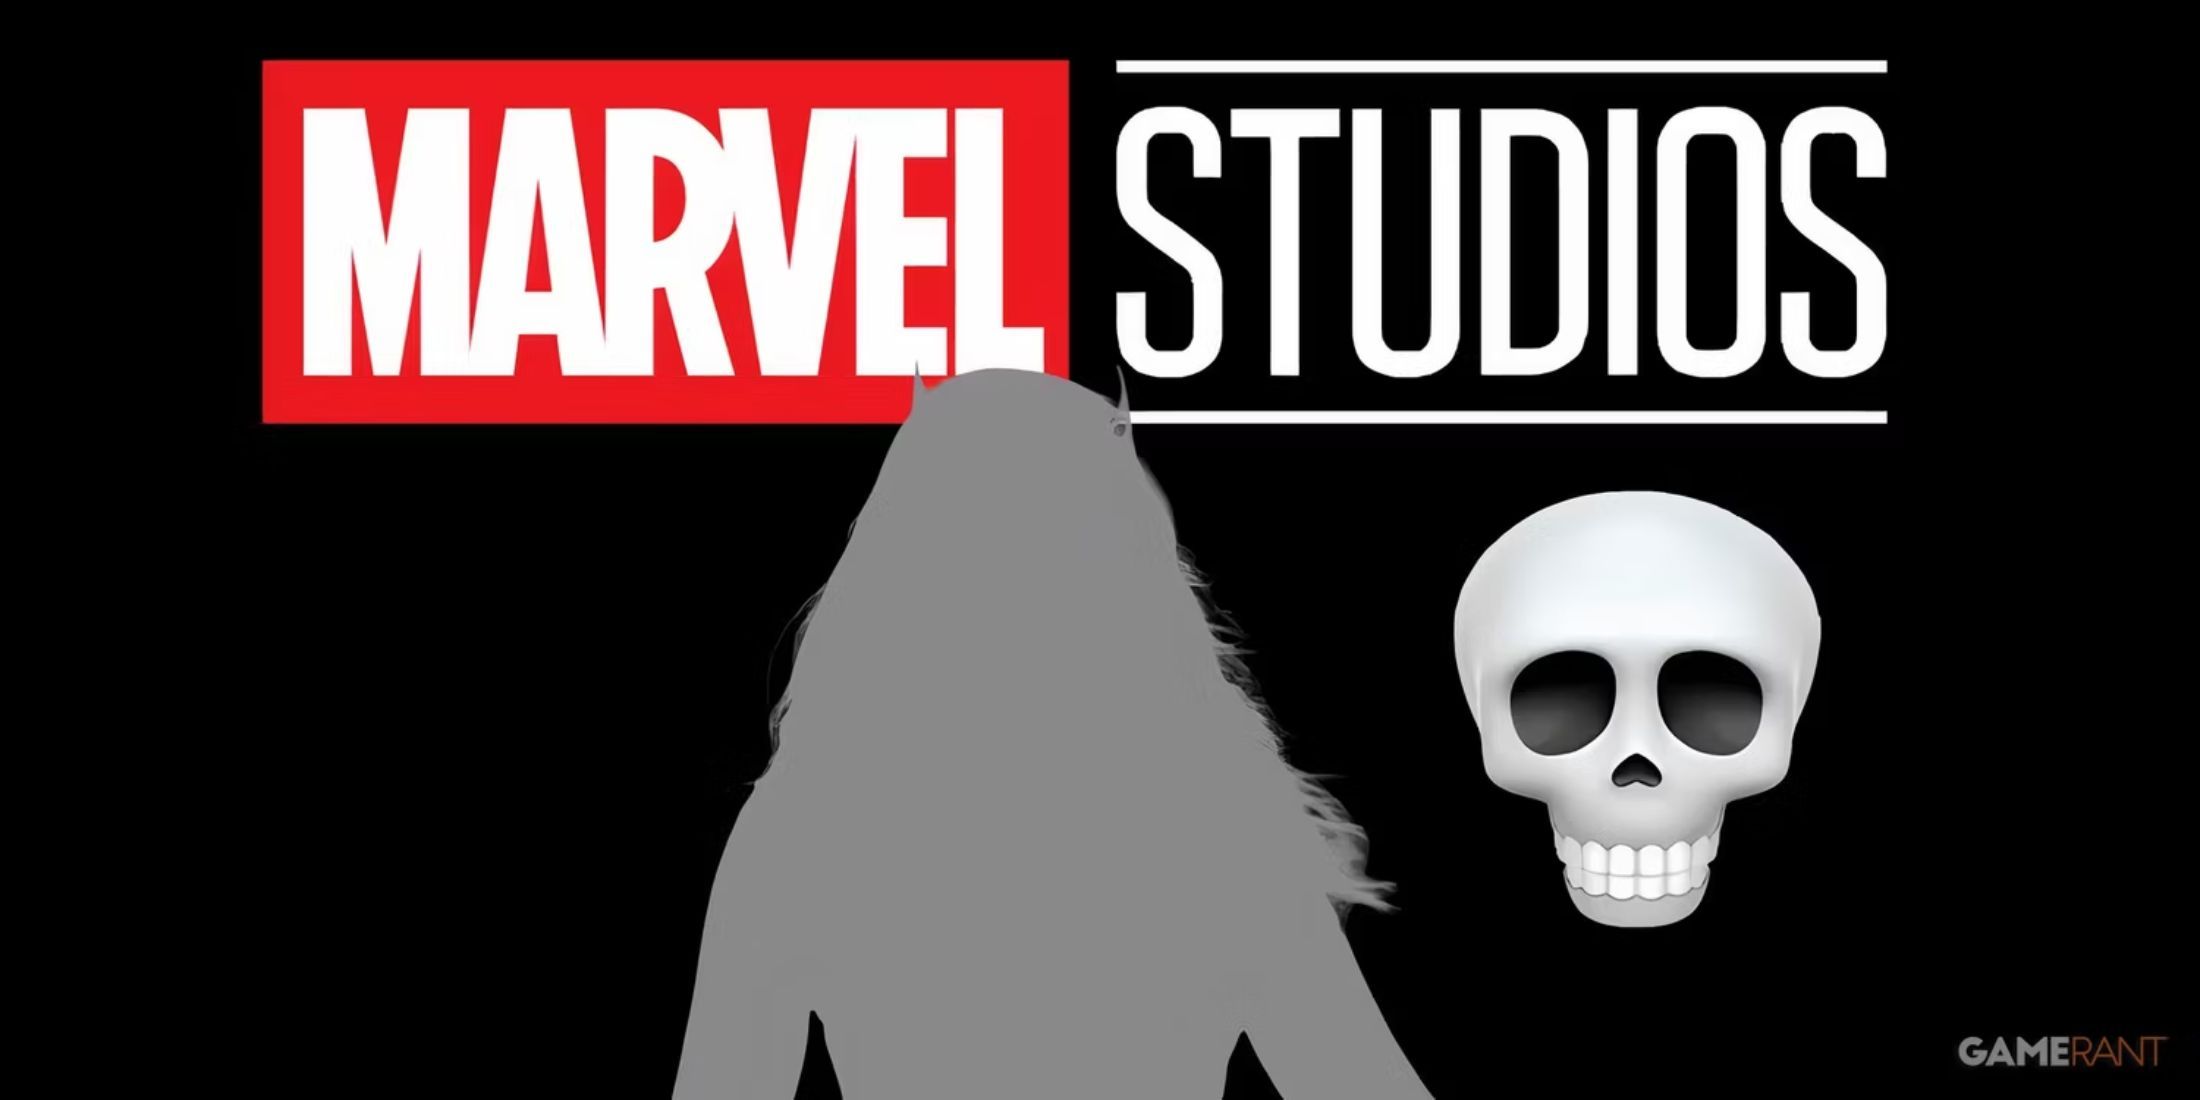 Marvel Studios logo with a shadow of a popular MCU character